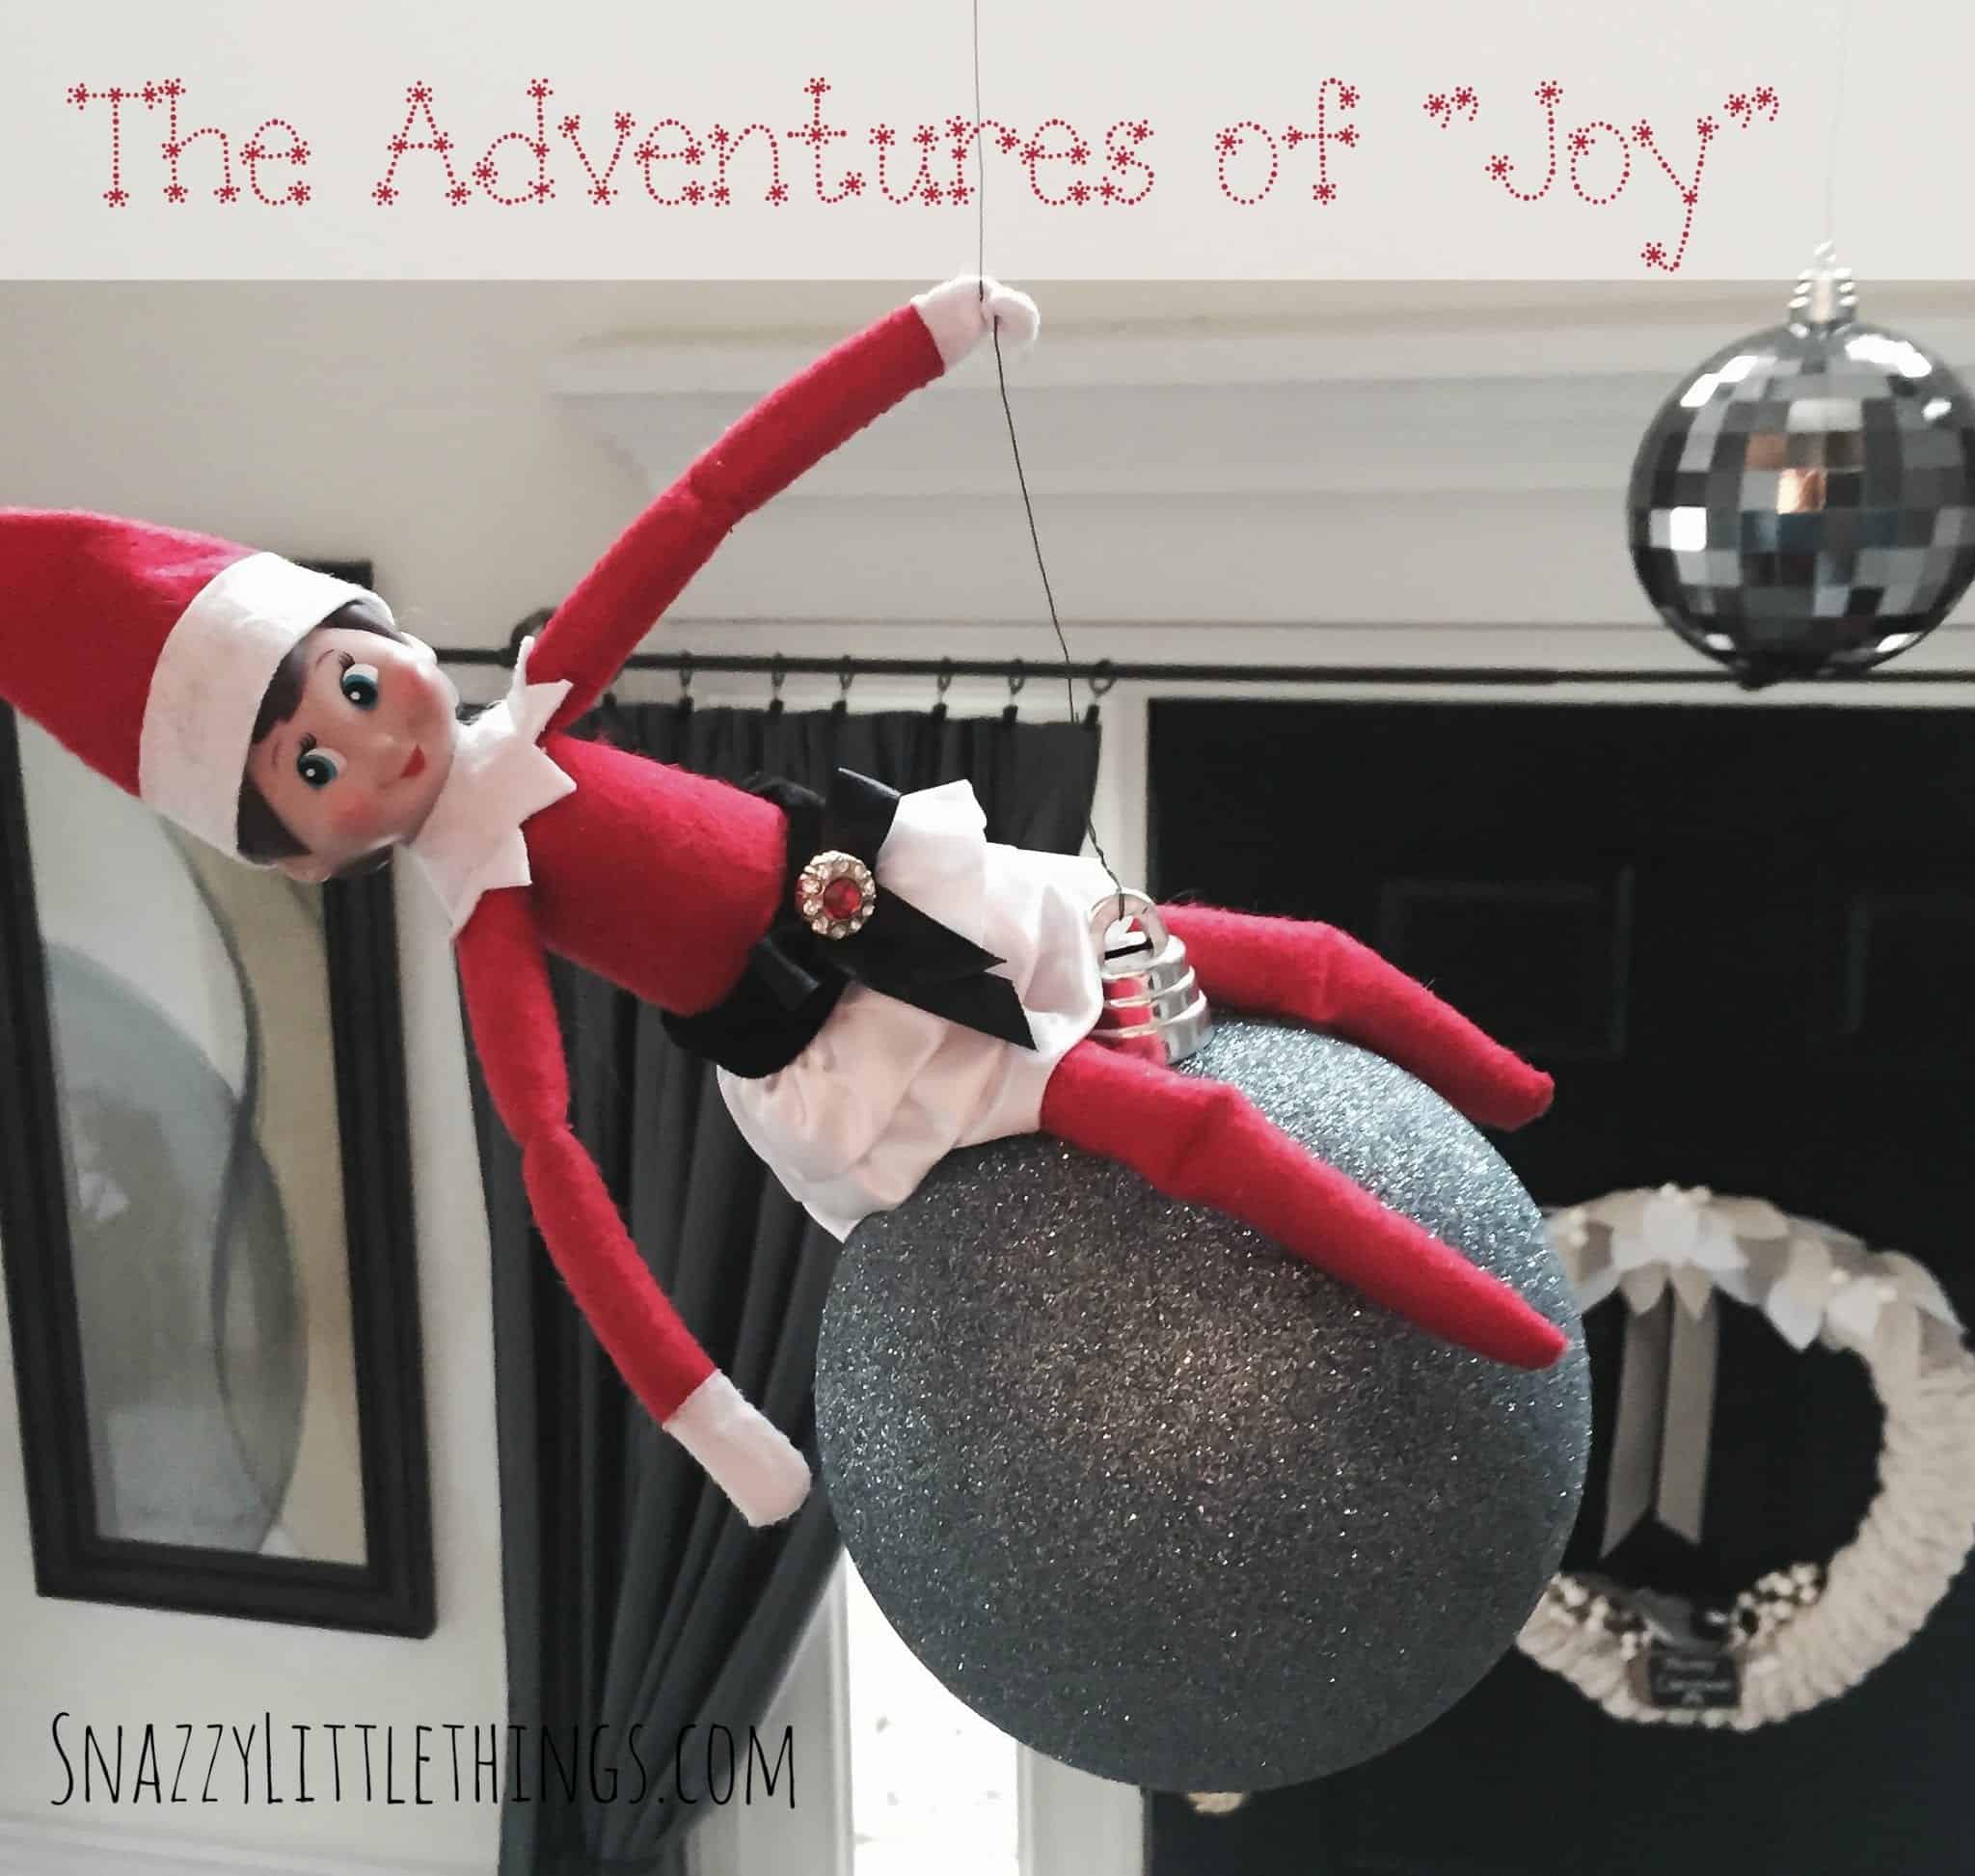 "Wrecking Ball" Elf on the Shelf, by SnazzyLittleThings.com